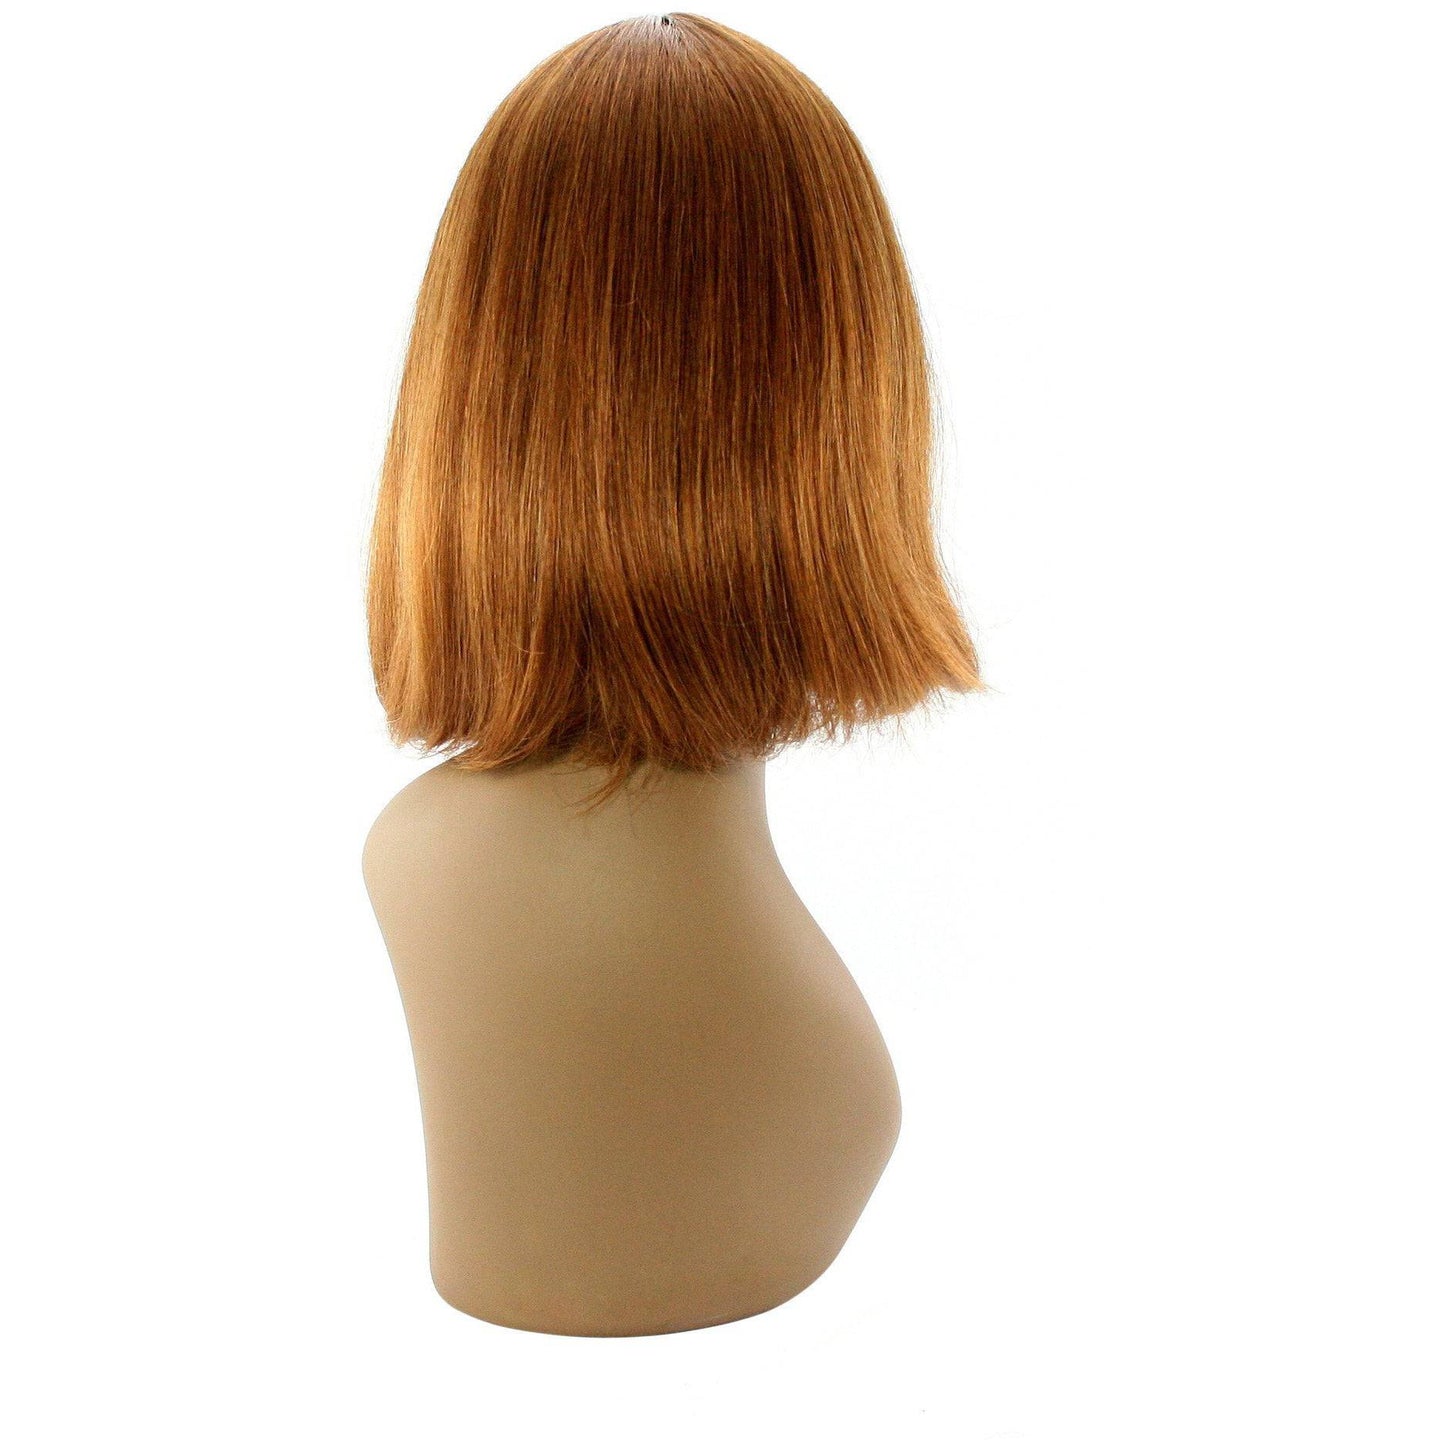 Unique's 100% Human Hair Full Wig / Style "M" - VIP Extensions